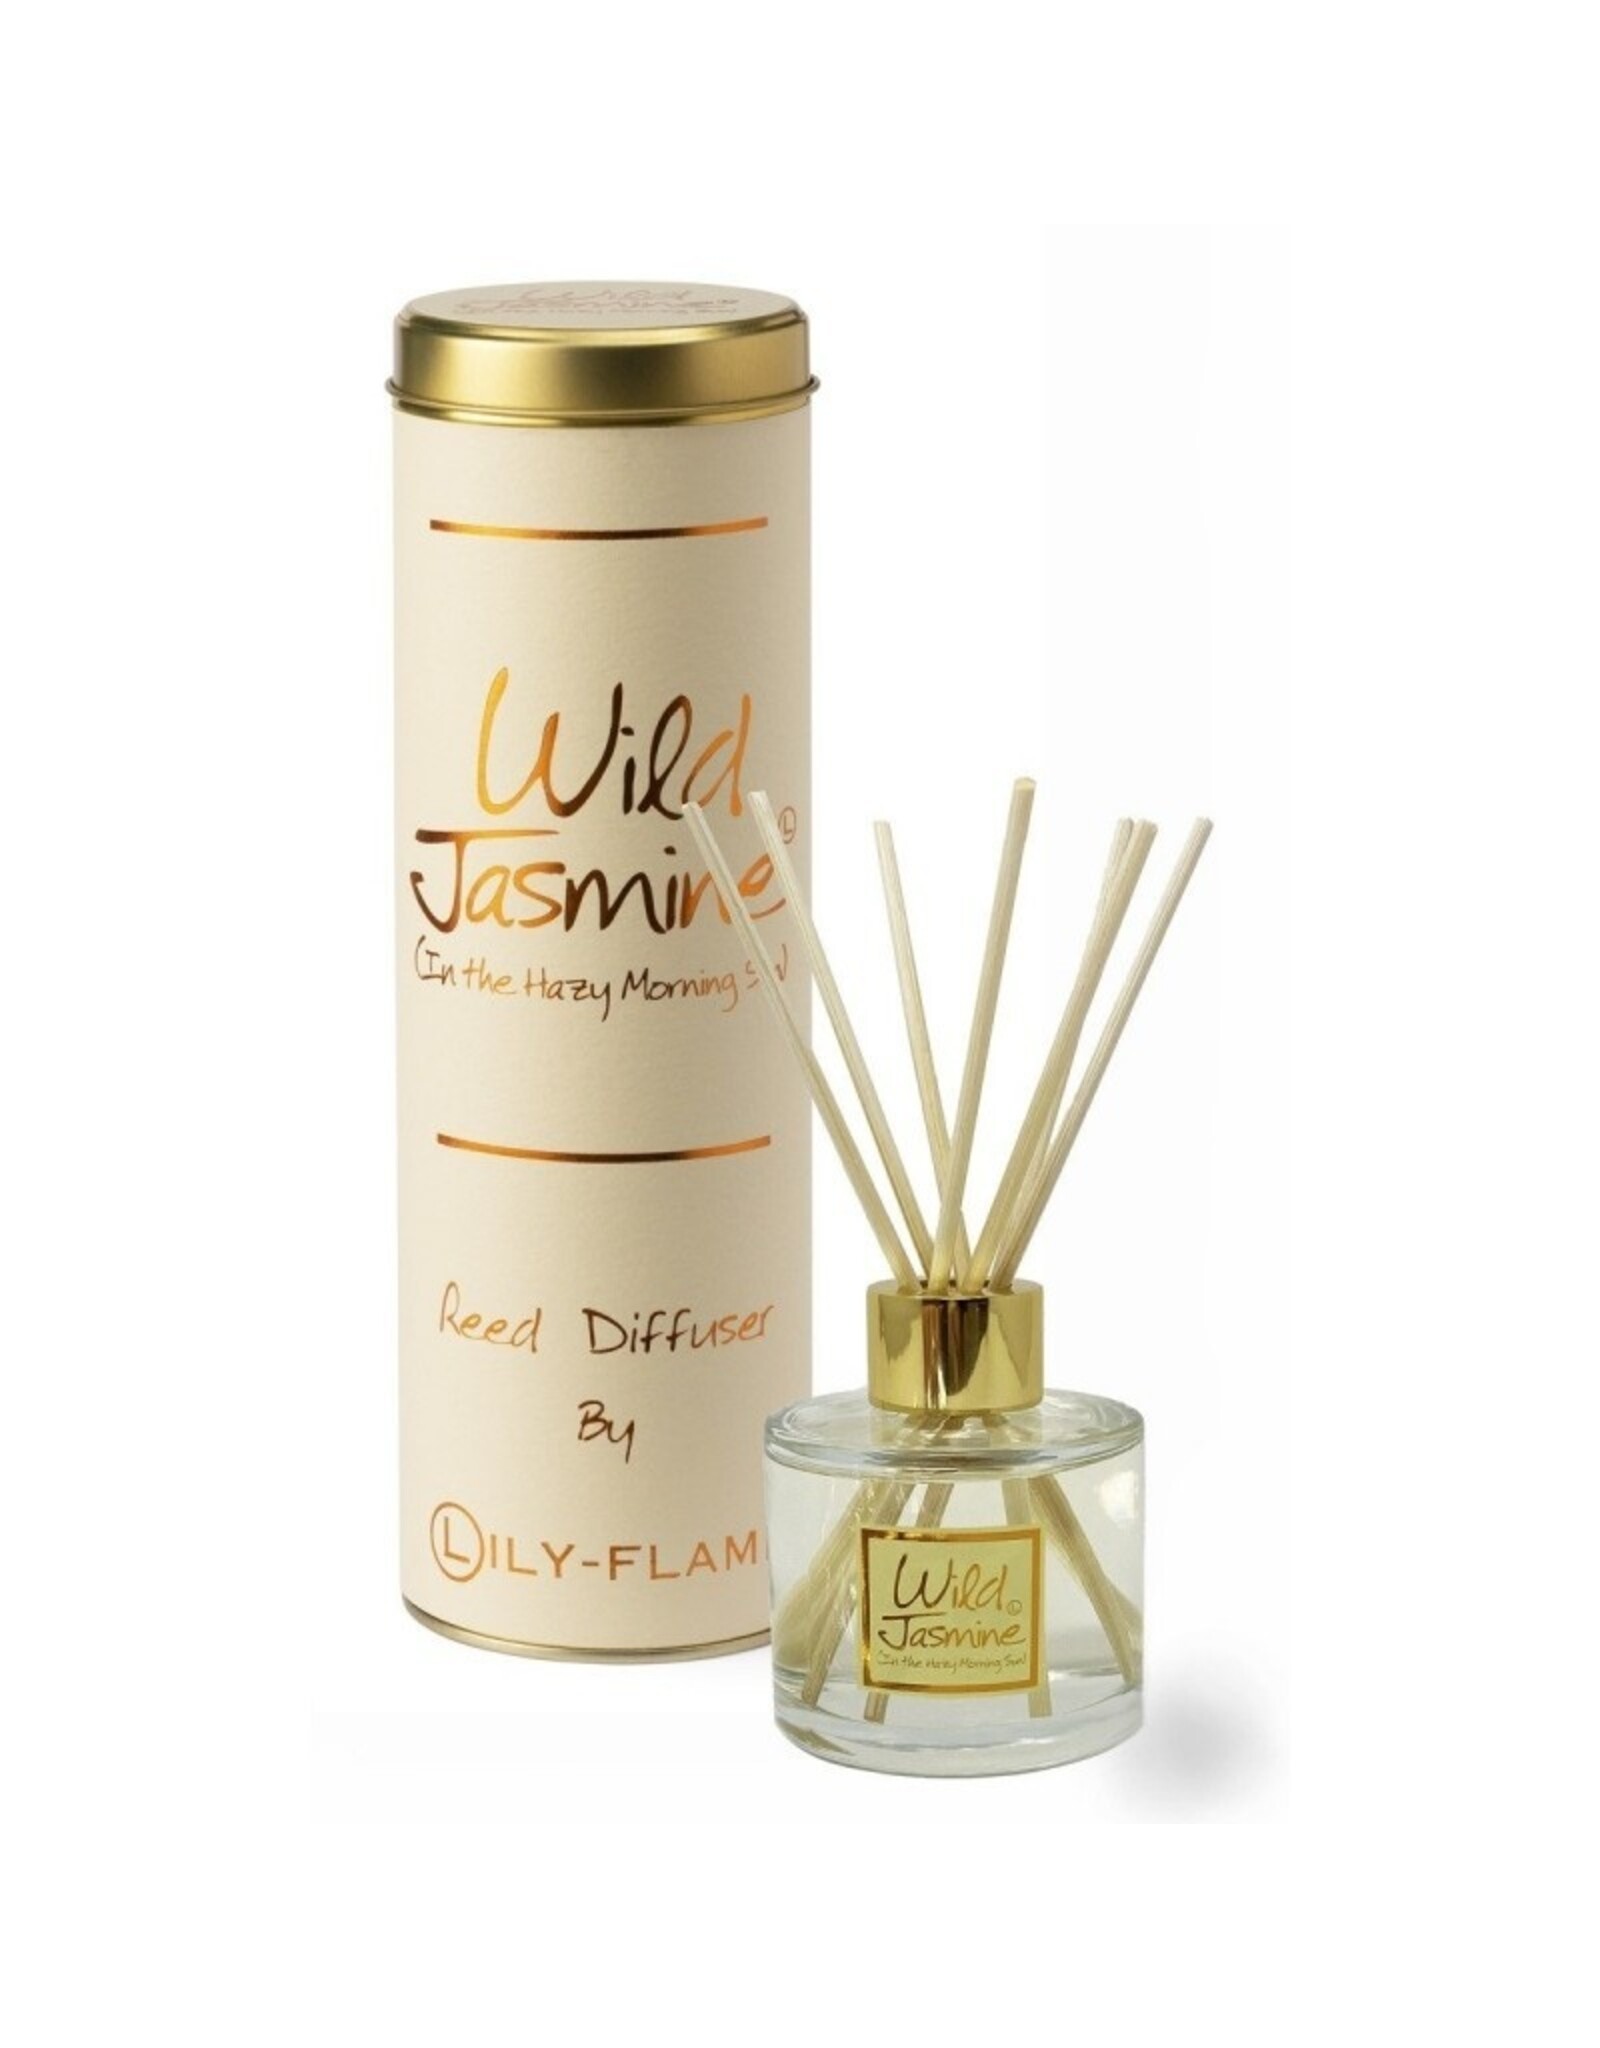 Lily-flame  Diffuser | Lily Flame | Wild Jasmine